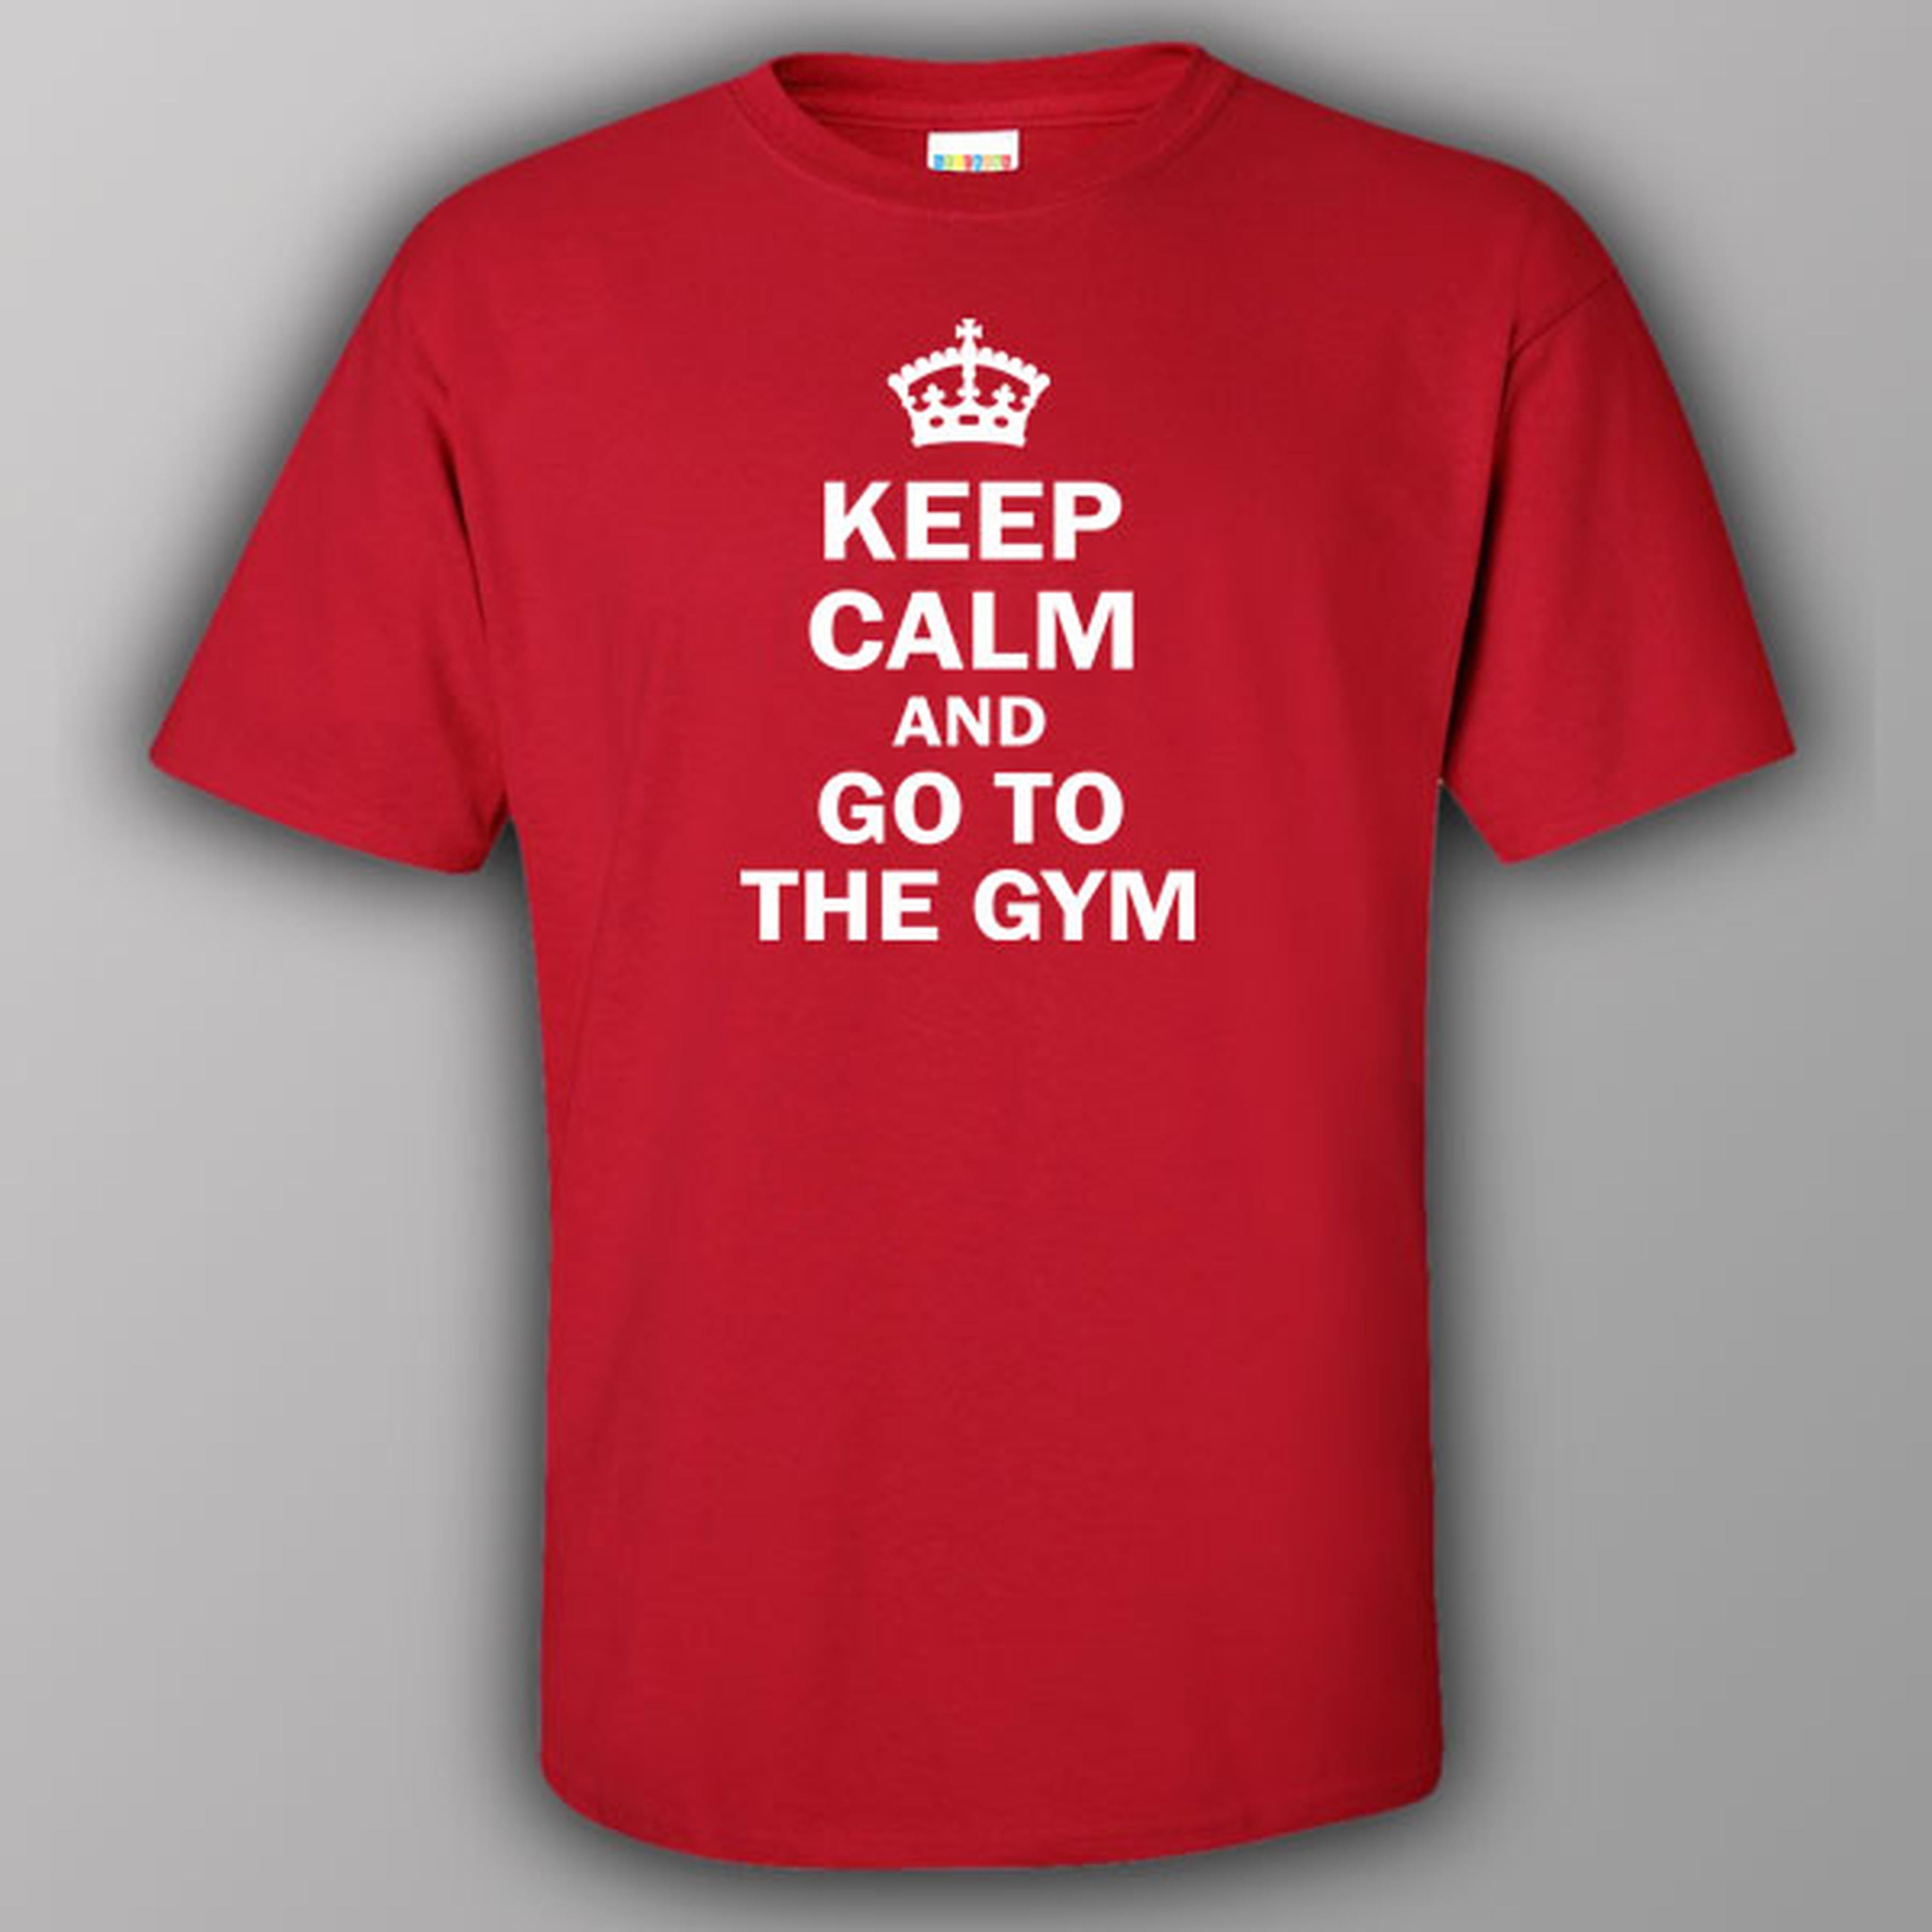 keep-calm-and-go-to-the-gym-t-shirt